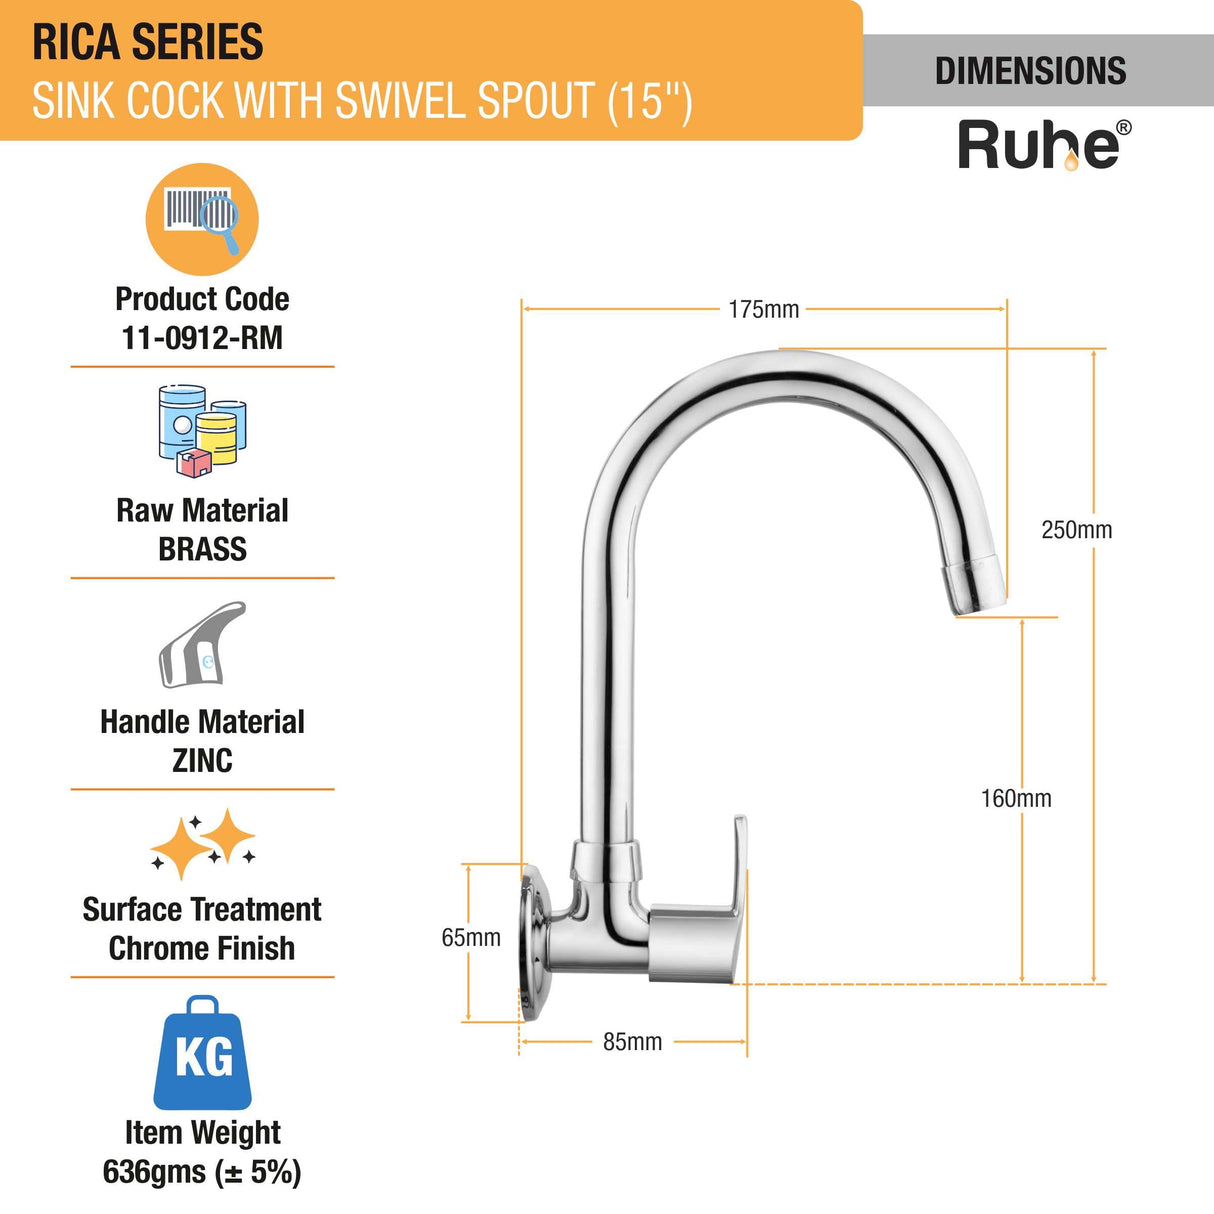 Rica Sink Tap with Medium (15 inches) Round Swivel Spout Brass Faucet dimensions and size